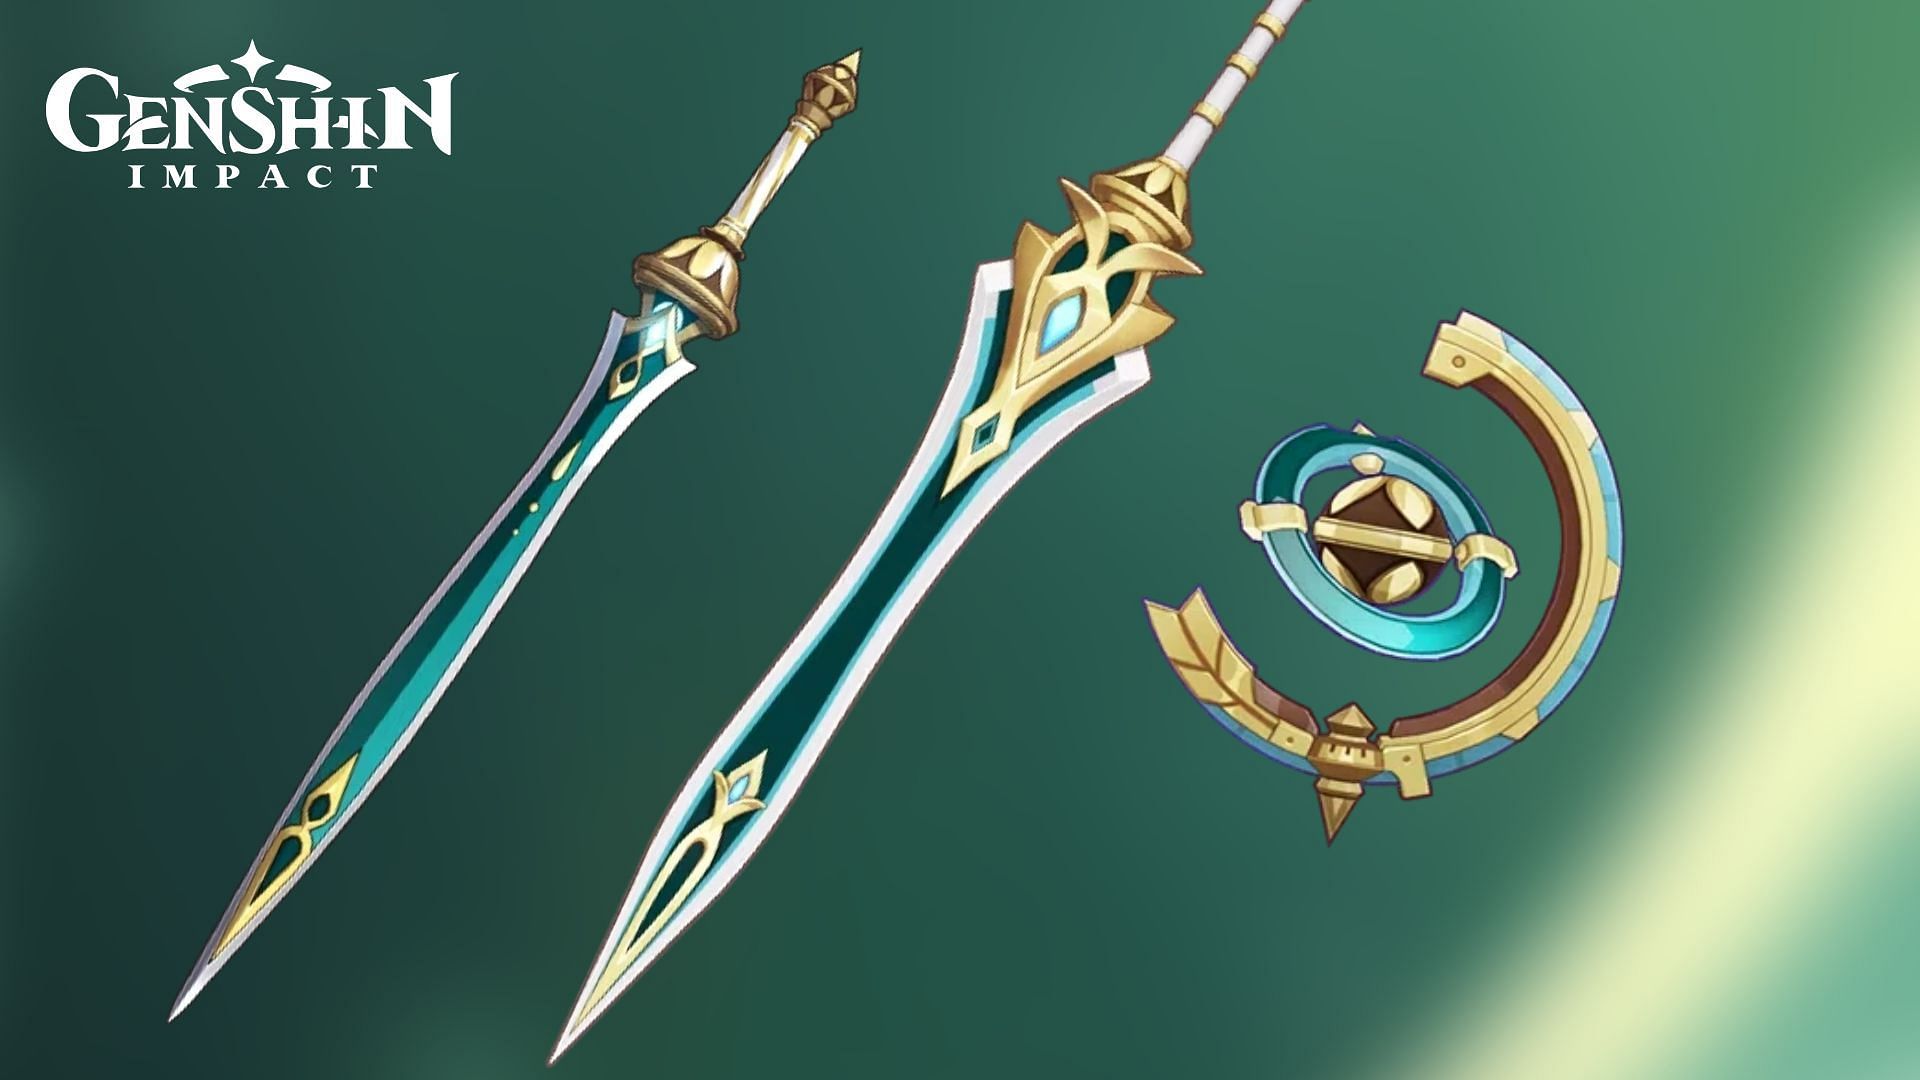 New 4-star weapons being added in patch 3.1 (Image via Genshin Impact)